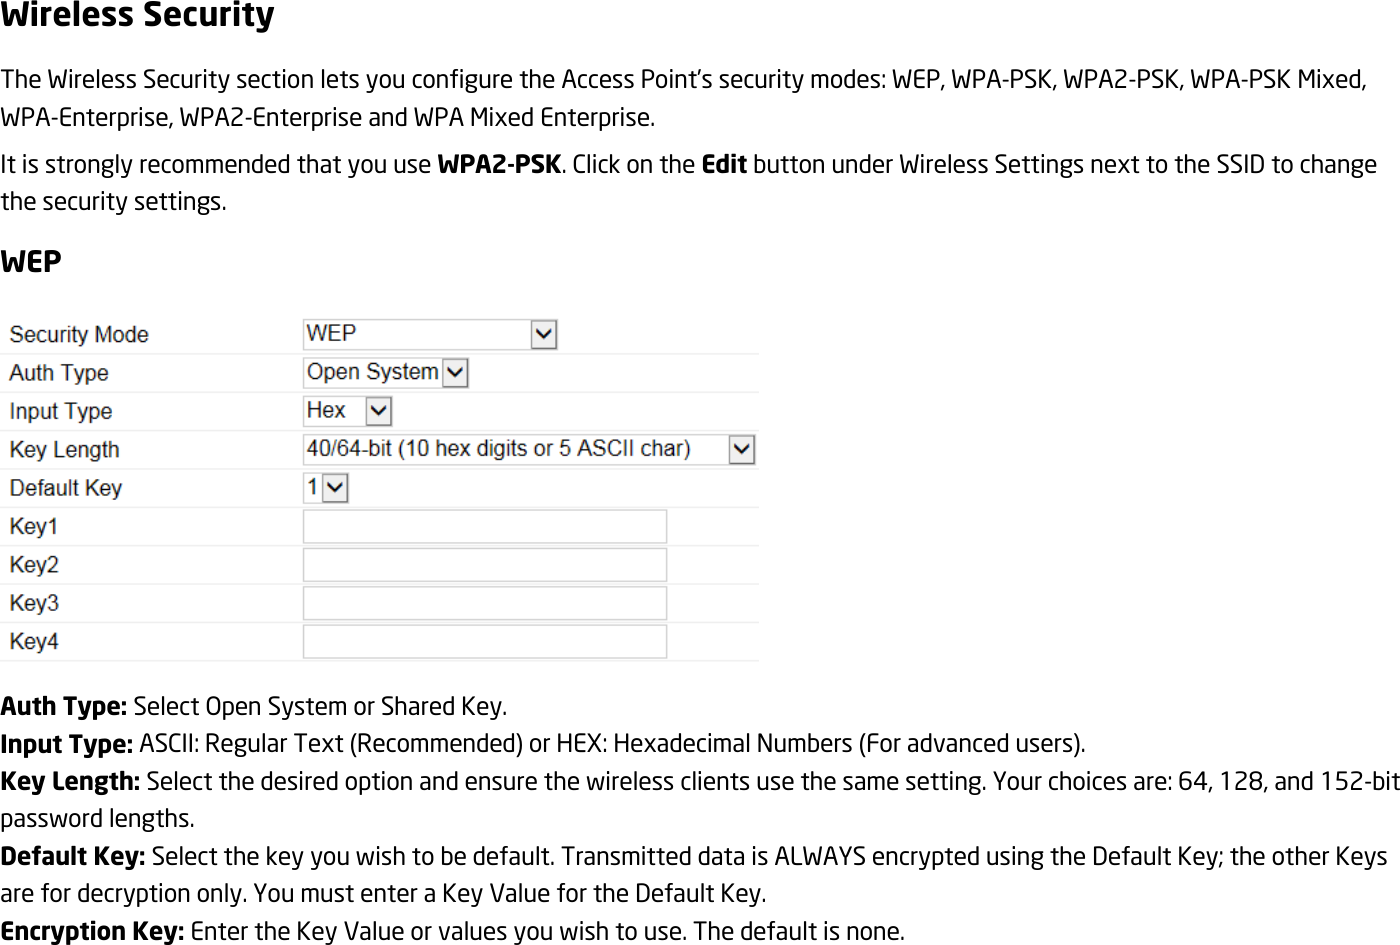 Wireless Security The Wireless Security section lets you configure the Access Point’s security modes: WEP, WPA-PSK, WPA2-PSK, WPA-PSK Mixed, WPA-Enterprise, WPA2-Enterprise and WPA Mixed Enterprise. It is strongly recommended that you use WPA2-PSK. Click on the Edit button under Wireless Settings next to the SSID to change the security settings. WEP  Auth Type: Select Open System or Shared Key. Input Type: ASCII: Regular Text (Recommended) or HEX: Hexadecimal Numbers (For advanced users). Key Length: Select the desired option and ensure the wireless clients use the same setting. Your choices are: 64, 128, and 152-bit password lengths. Default Key: Select the key you wish to be default. Transmitted data is ALWAYS encrypted using the Default Key; the other Keys are for decryption only. You must enter a Key Value for the Default Key. Encryption Key: Enter the Key Value or values you wish to use. The default is none.  